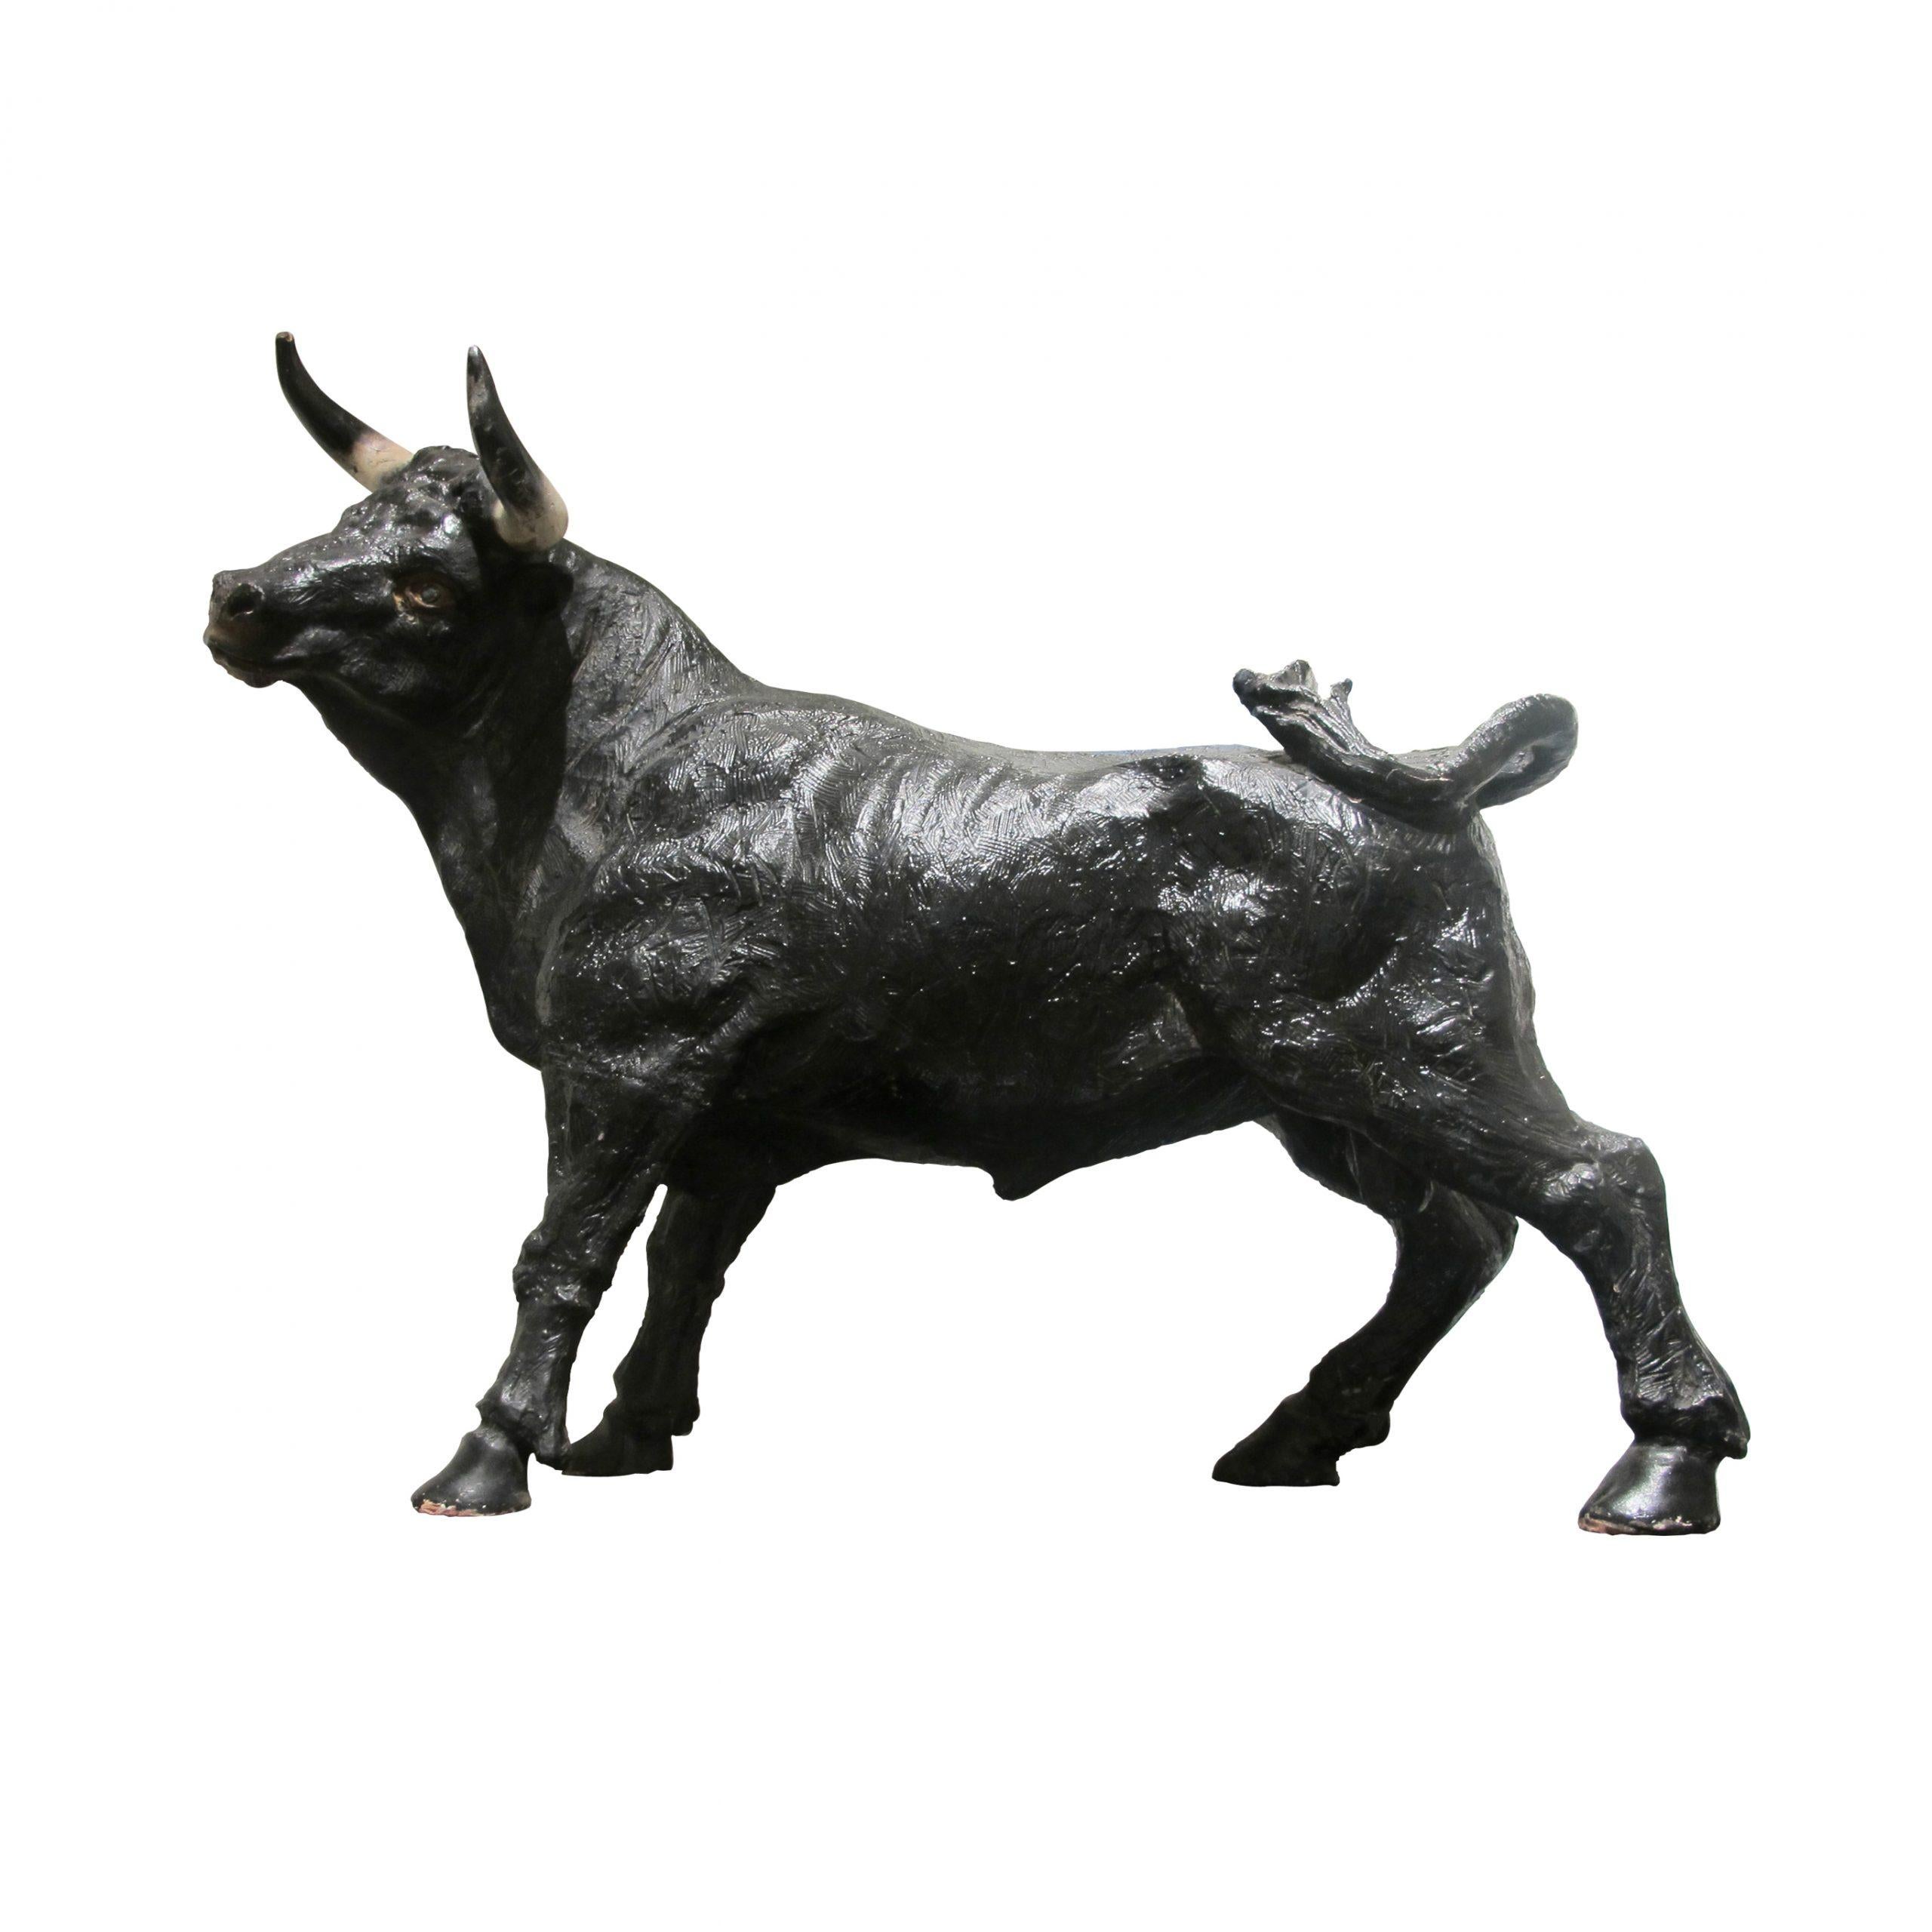 The bull is rendered in lifelike proportions, its muscular form exuding a sense of dynamic energy and vigour. The sculpture has a palpable sense of vitality and movement. 

Size: H87 cm x W100 cm x D35 cm
